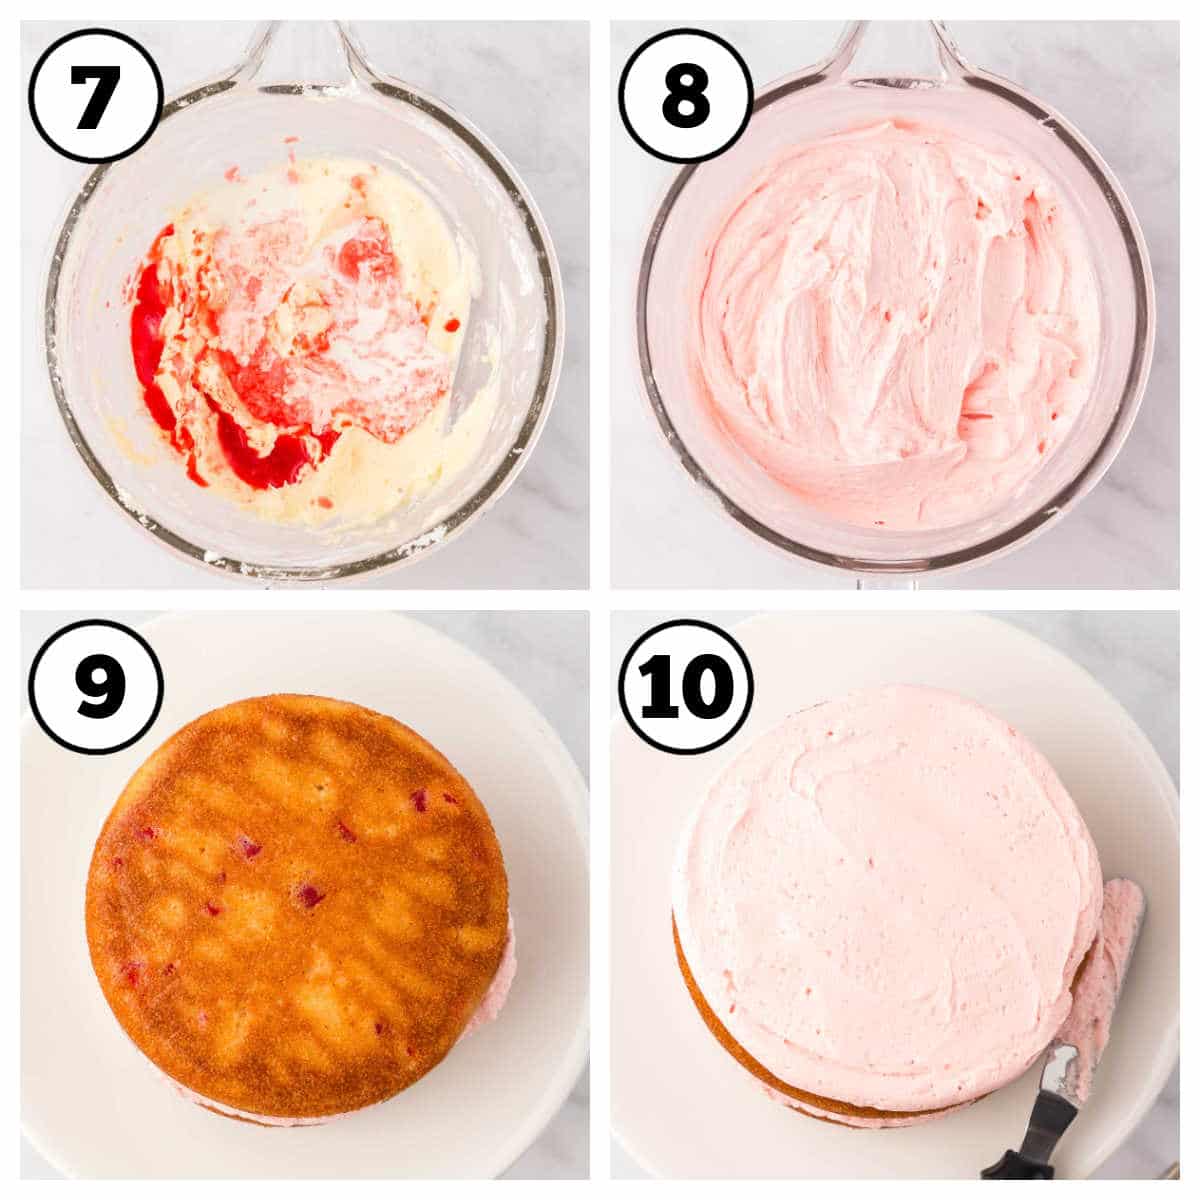 Steps 7-10, showing how to frost cherry chip cake.